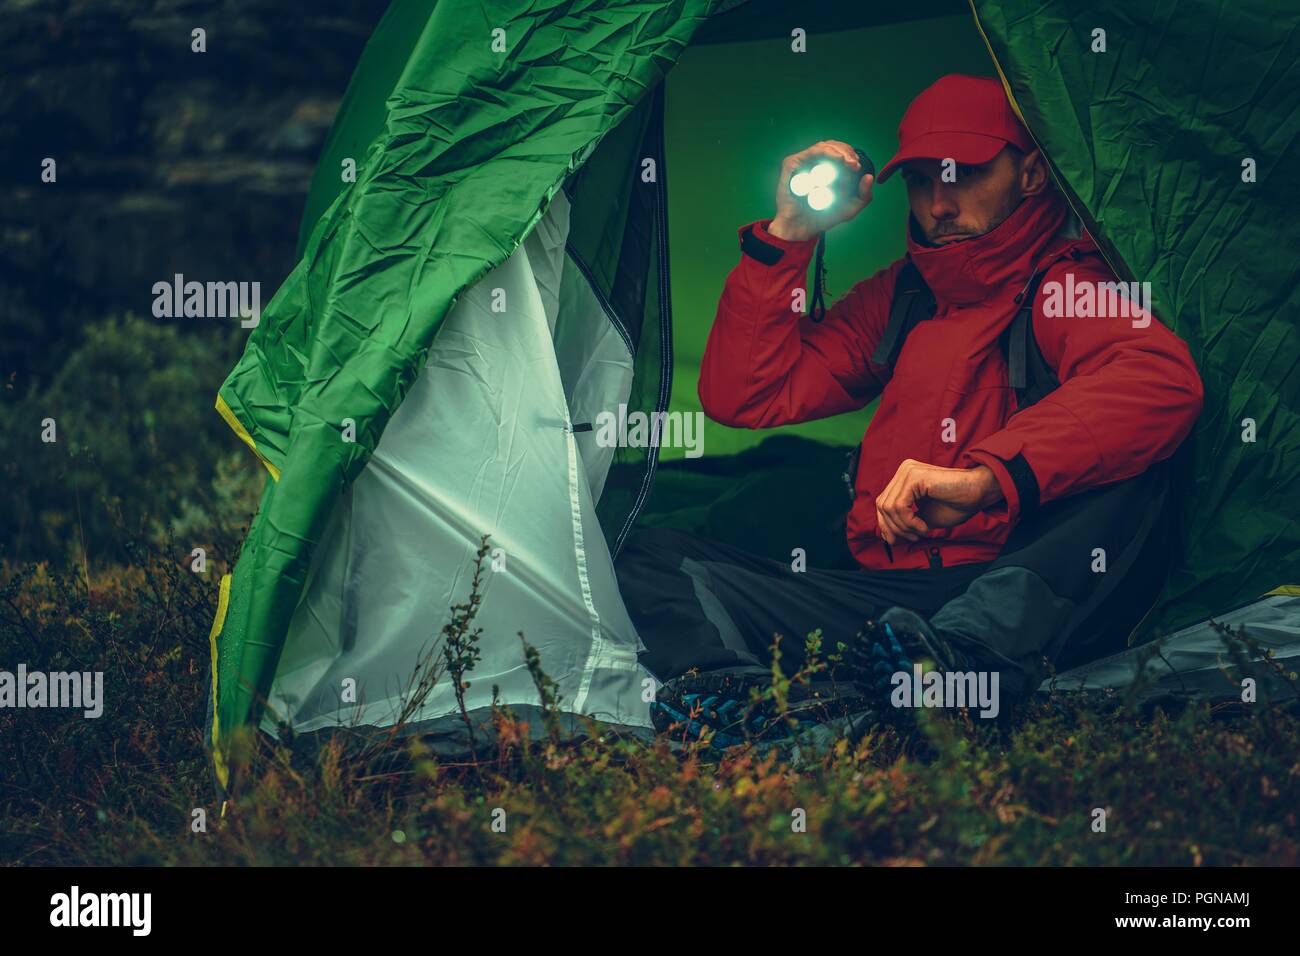 Caucasian Camper with Flashlight Inside His Tent During Rainy Evening While on Hike. Stock Photo